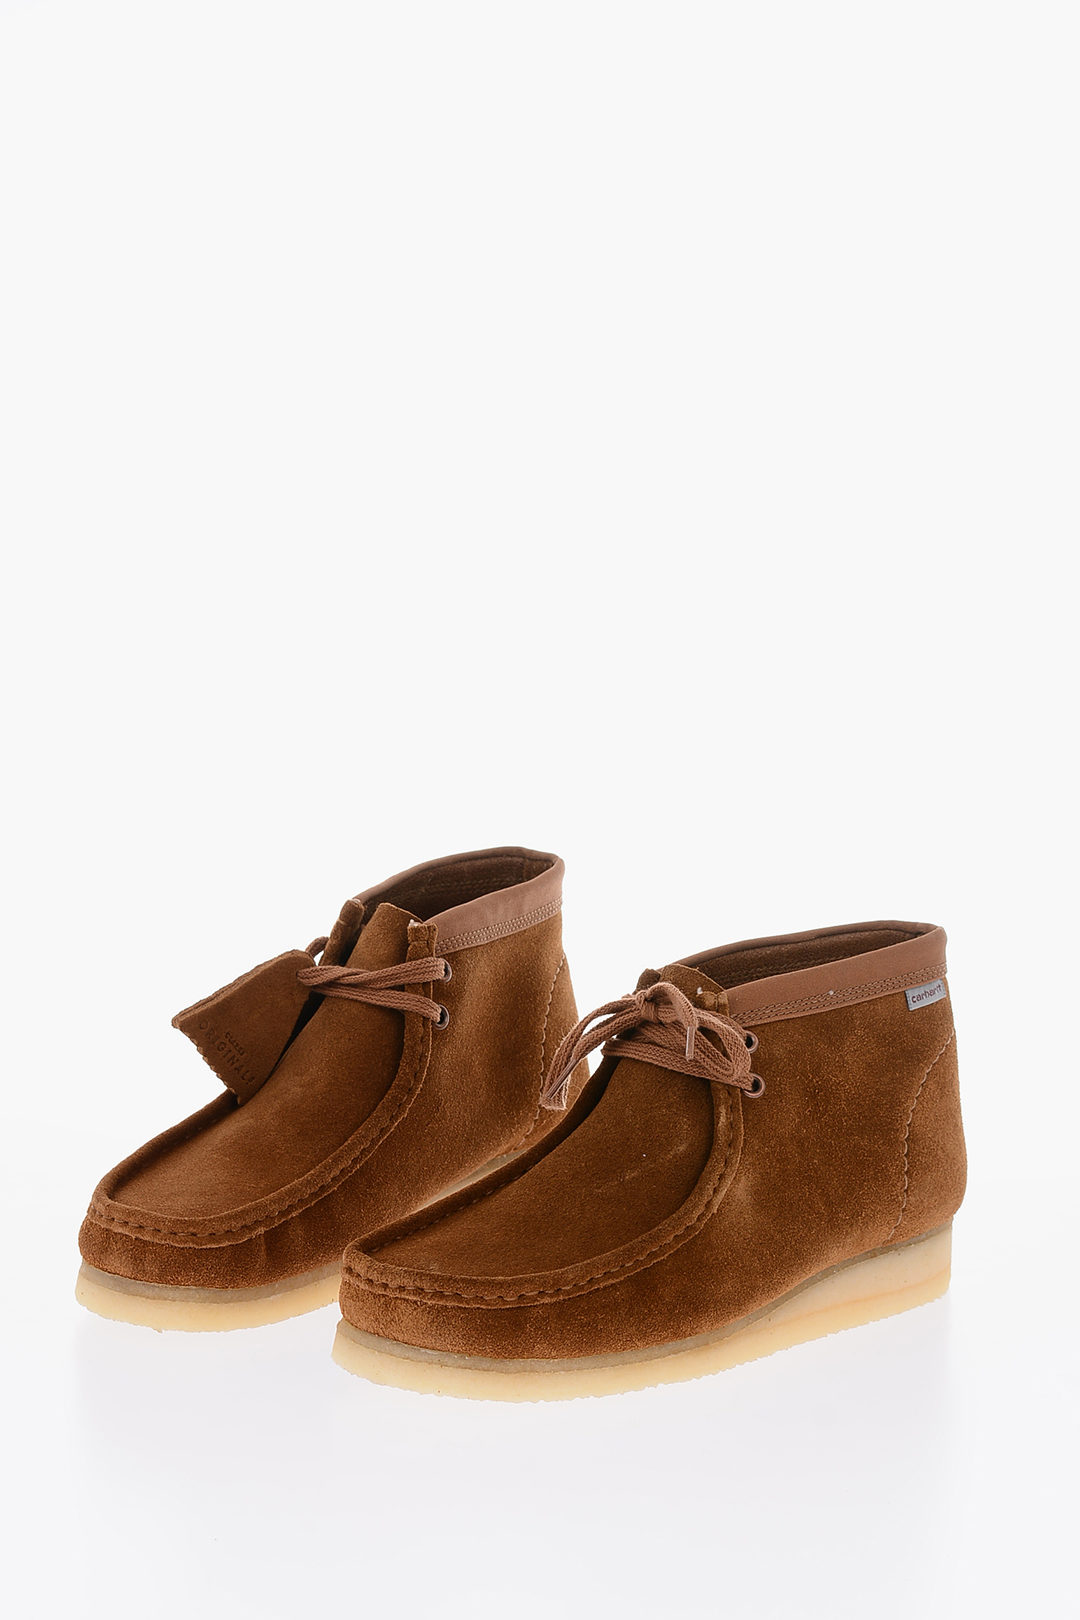 CARHARTT suede leather wallabee boots men - Glamood